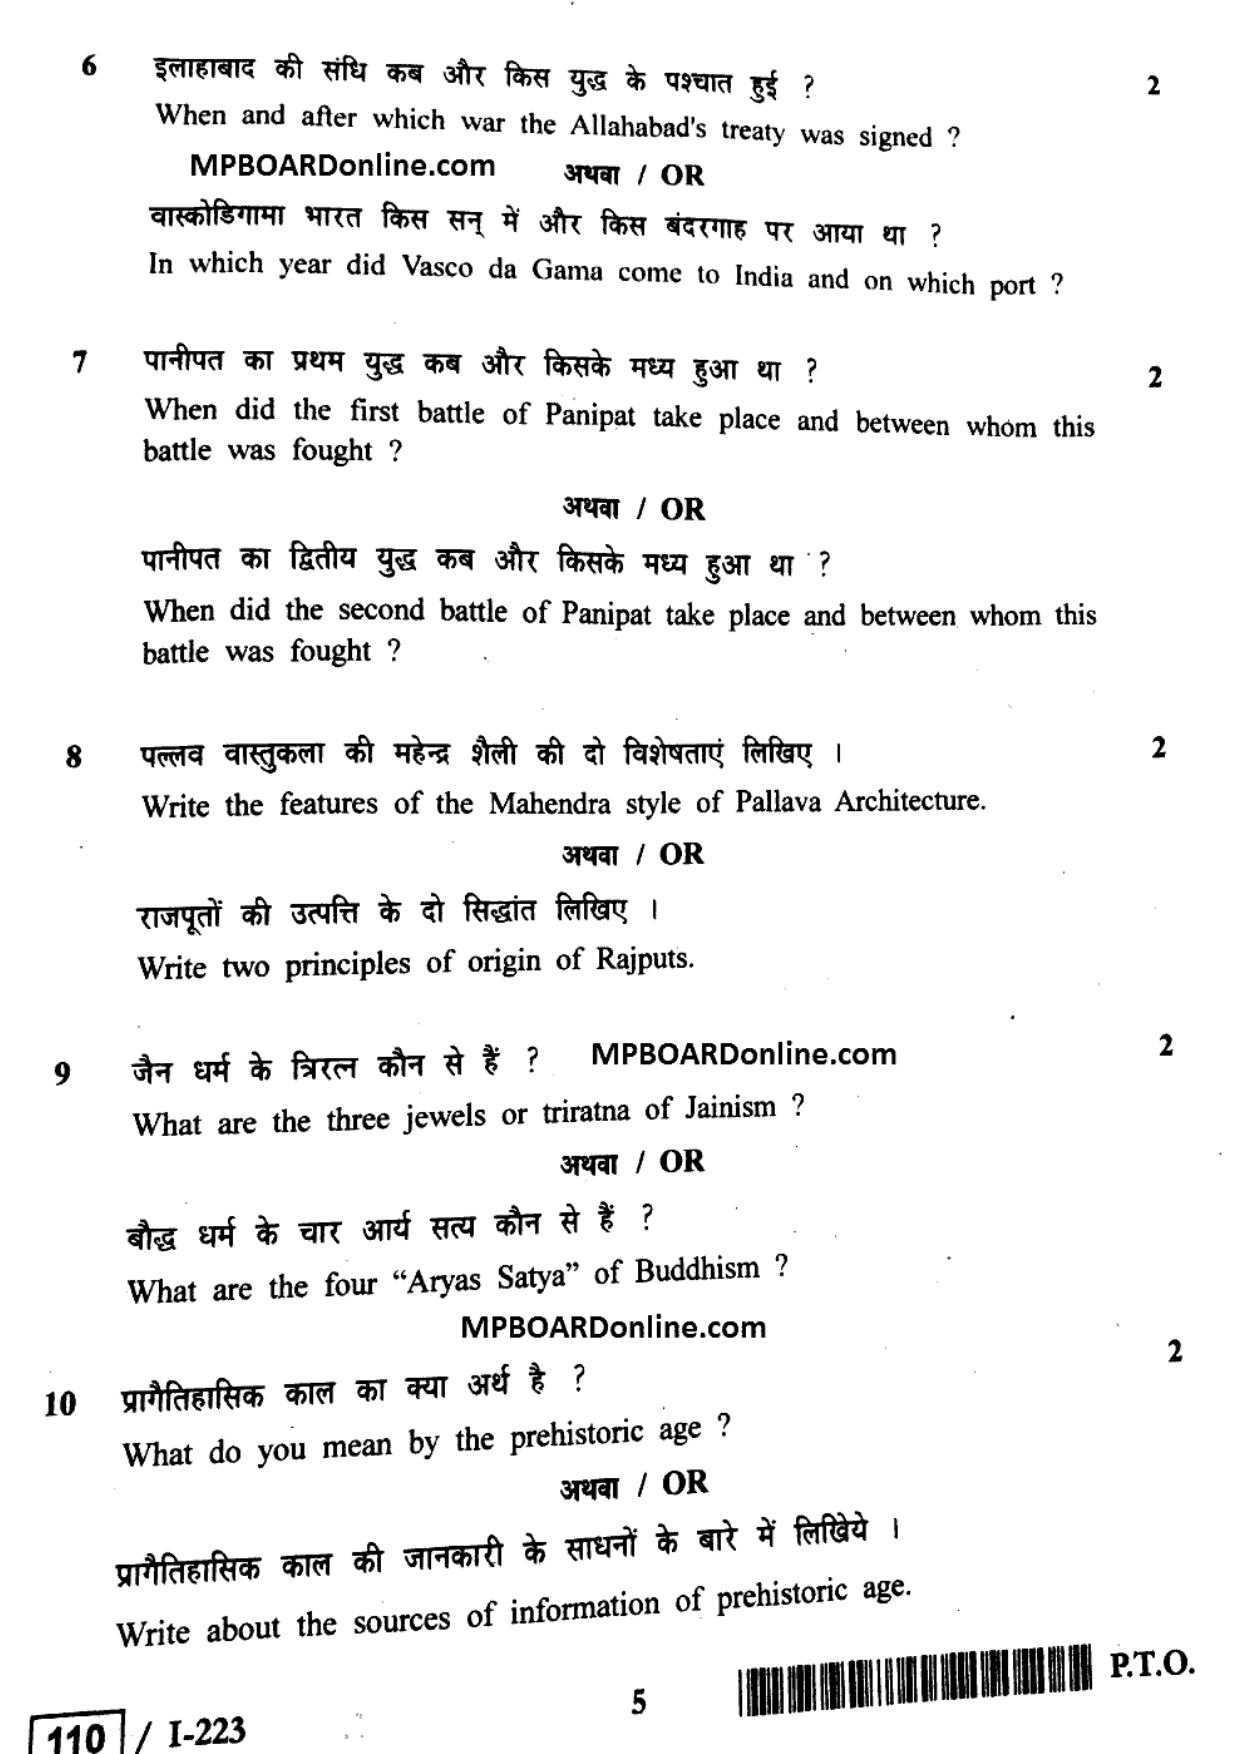 MP Board Class 12 History 2018 Question Paper - Page 5